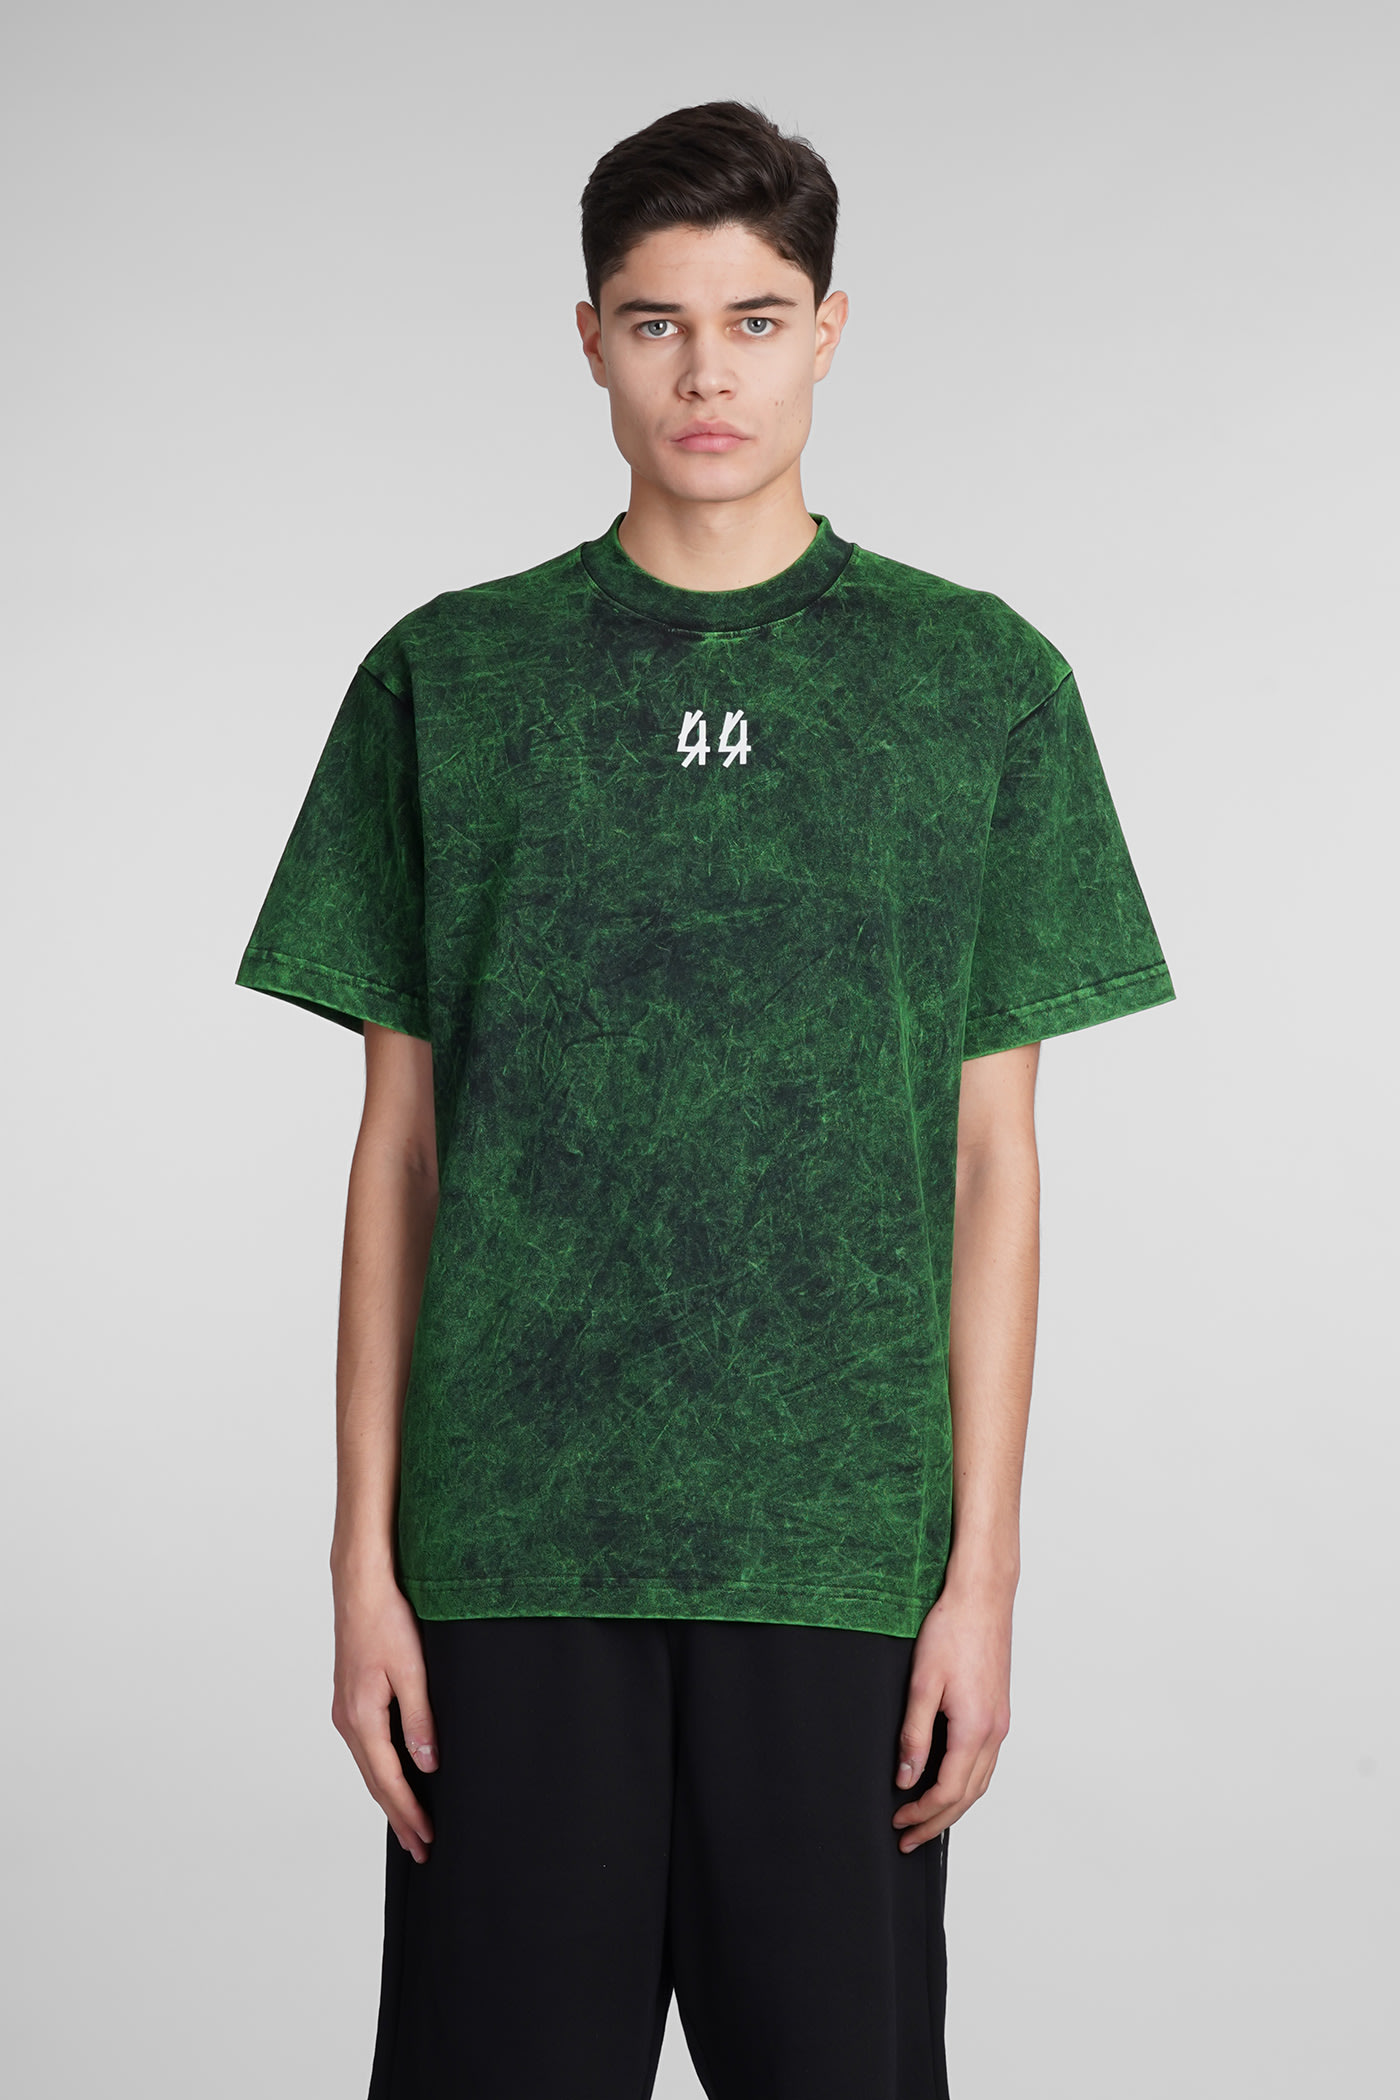 44 Label Group T-shirt In Green Cotton In Blk+sol.green + 44 Solid